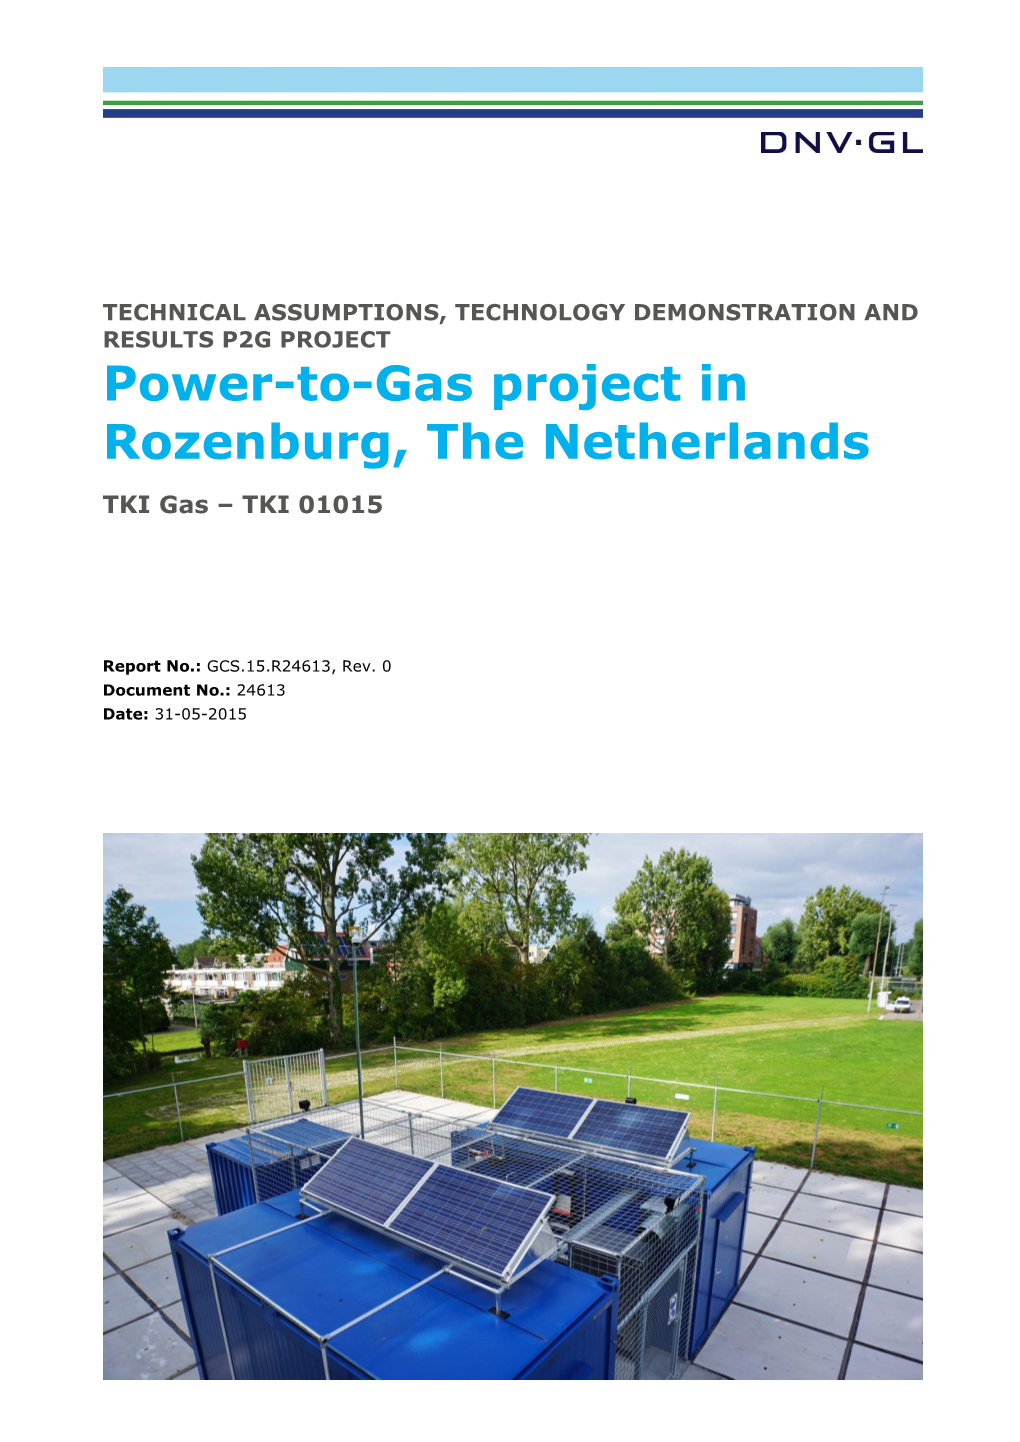 Power-To-Gas Project in Rozenburg, the Netherlands